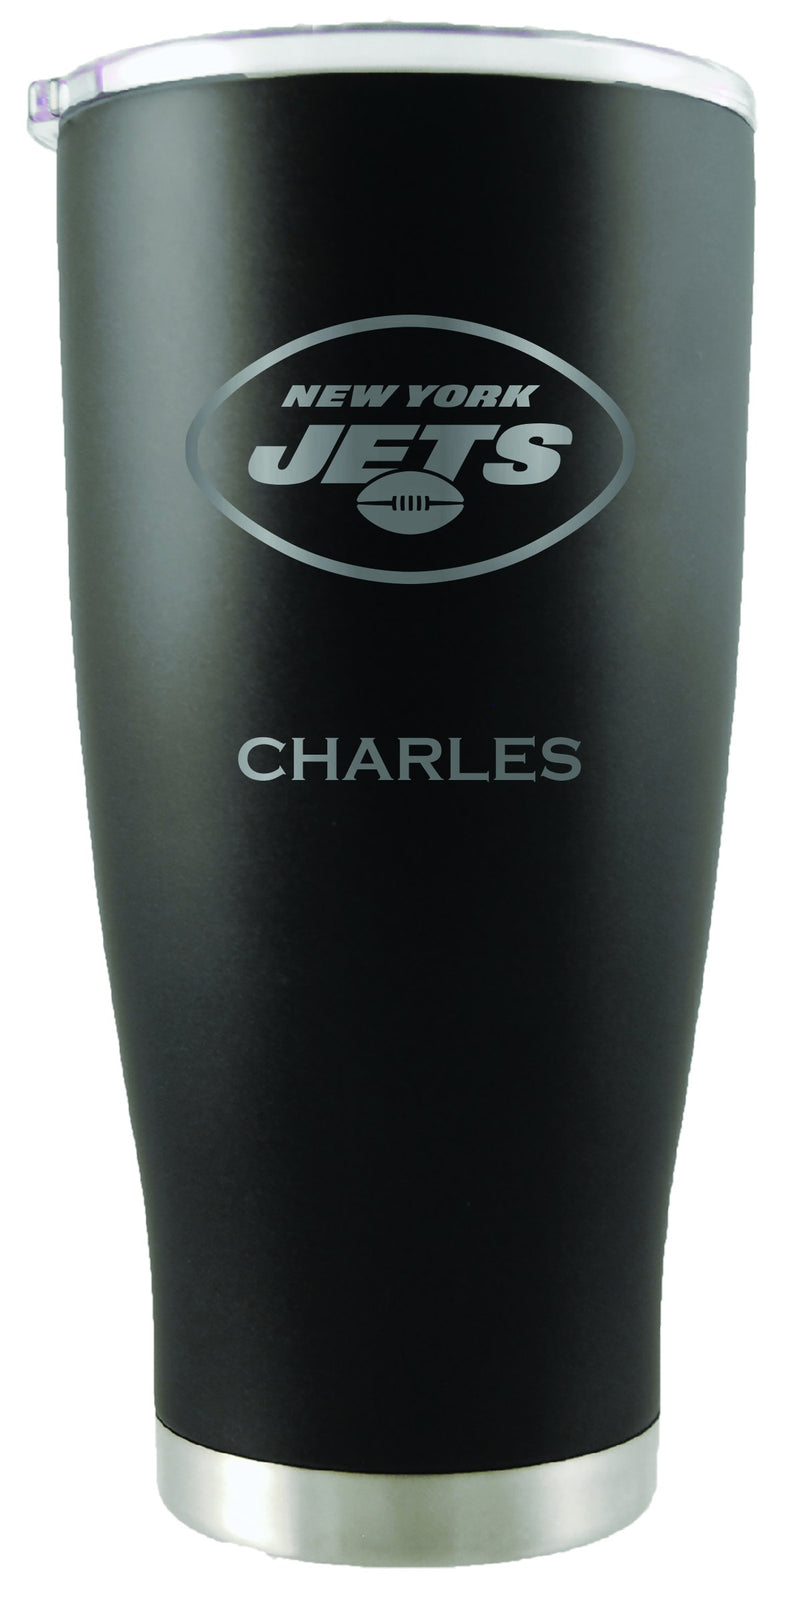 20oz Black Personalized Stainless Steel Tumbler | New York Jets
CurrentProduct, Drinkware_category_All, New York Jets, NFL, NYJ, Personalized_Personalized, Stainless Steel
The Memory Company